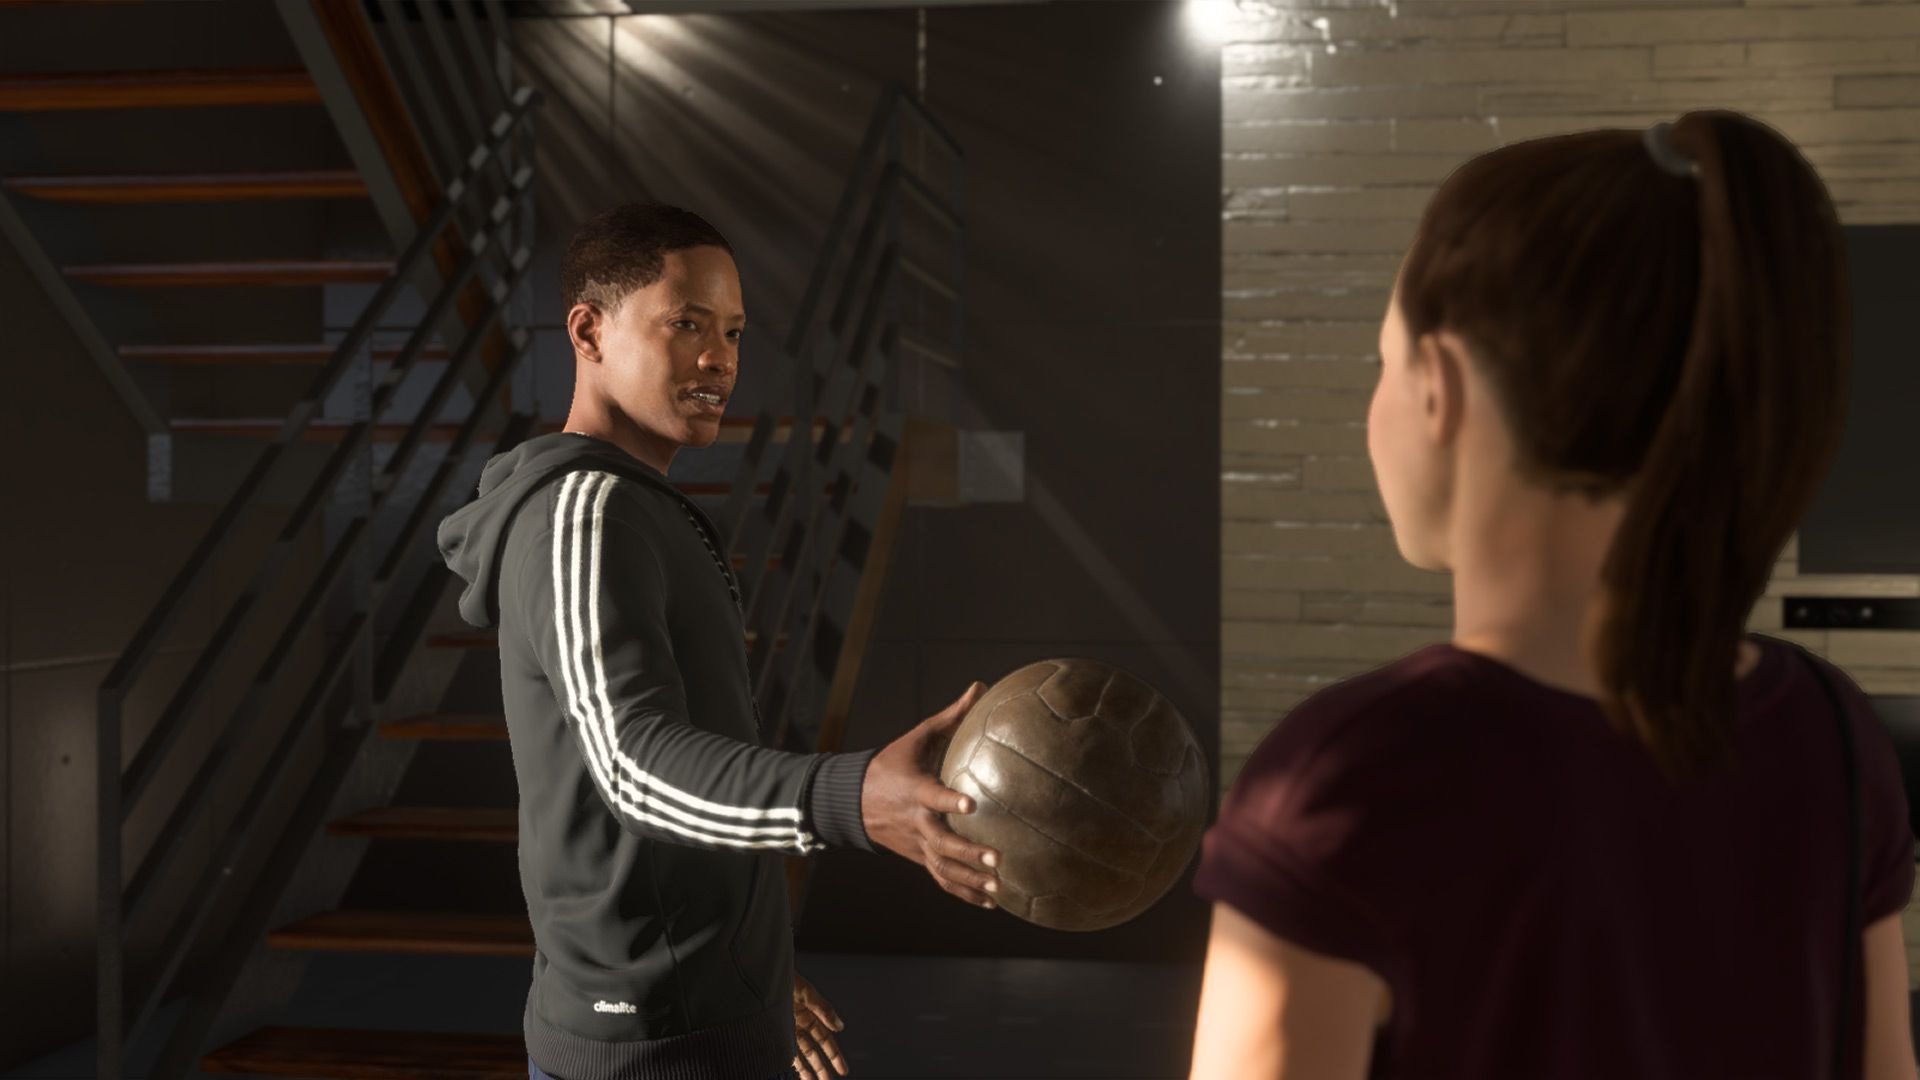 Fifa 18 review: plenty of footballing bang for your bucks, Games